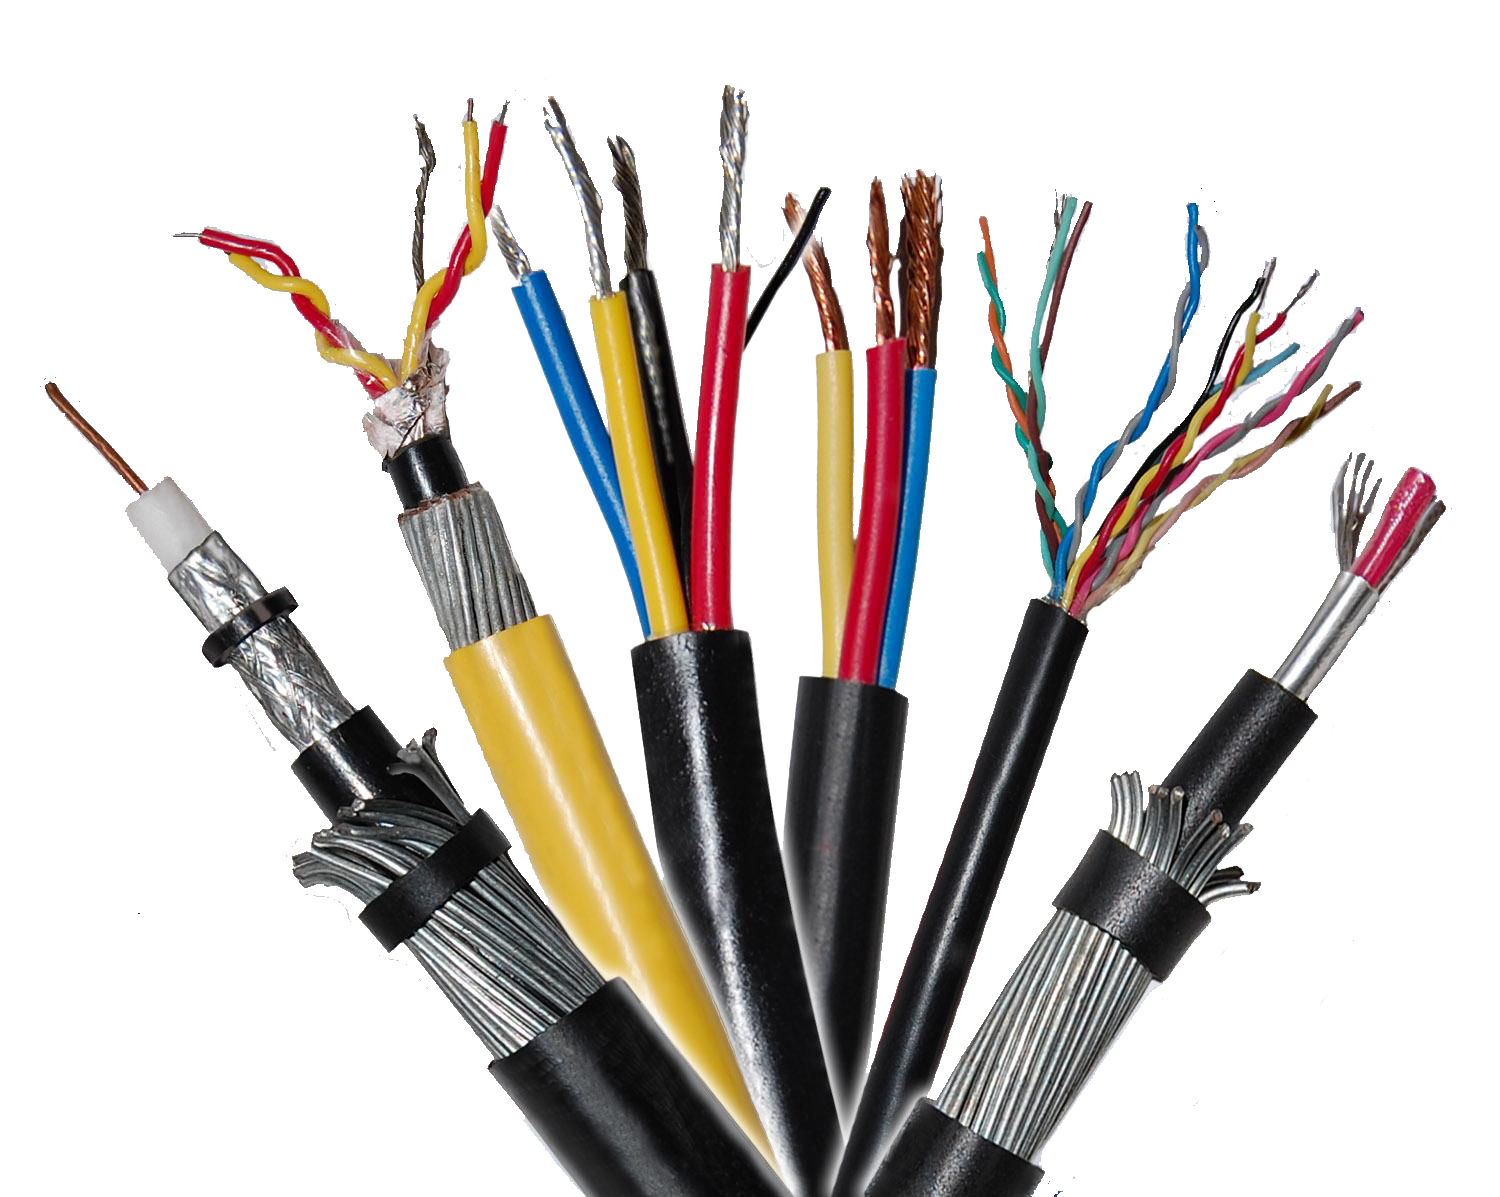  Exposed wires of various types of cables against a white background.